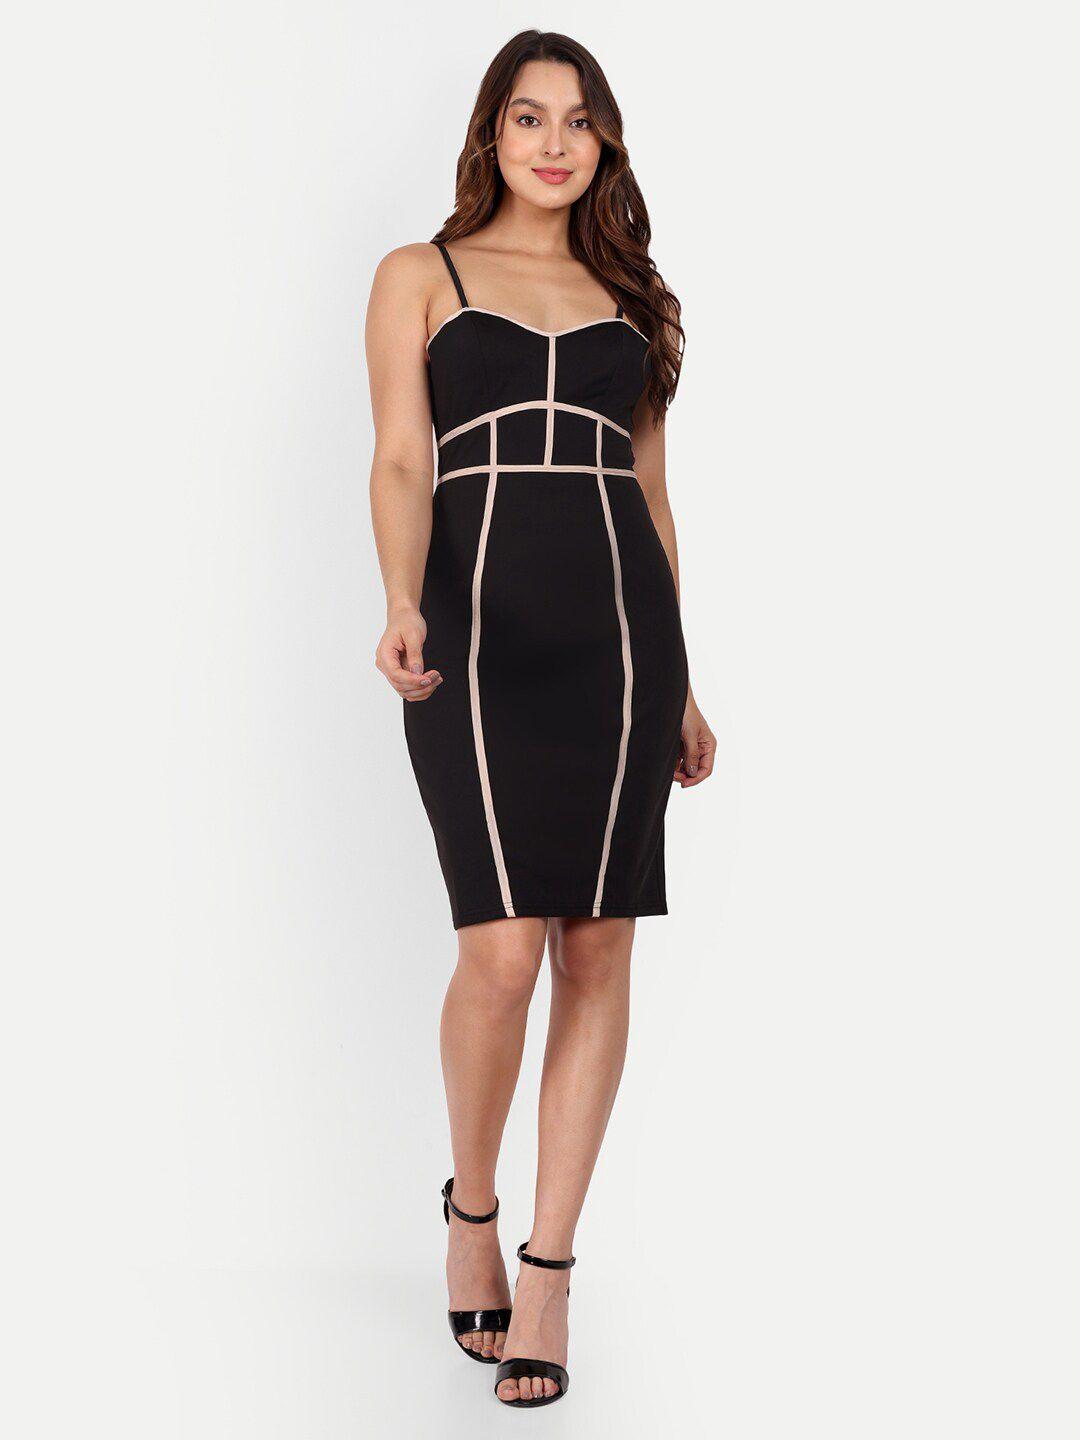 iki-chic-shoulder-strap-bodycon-dress-with-contrast-binding